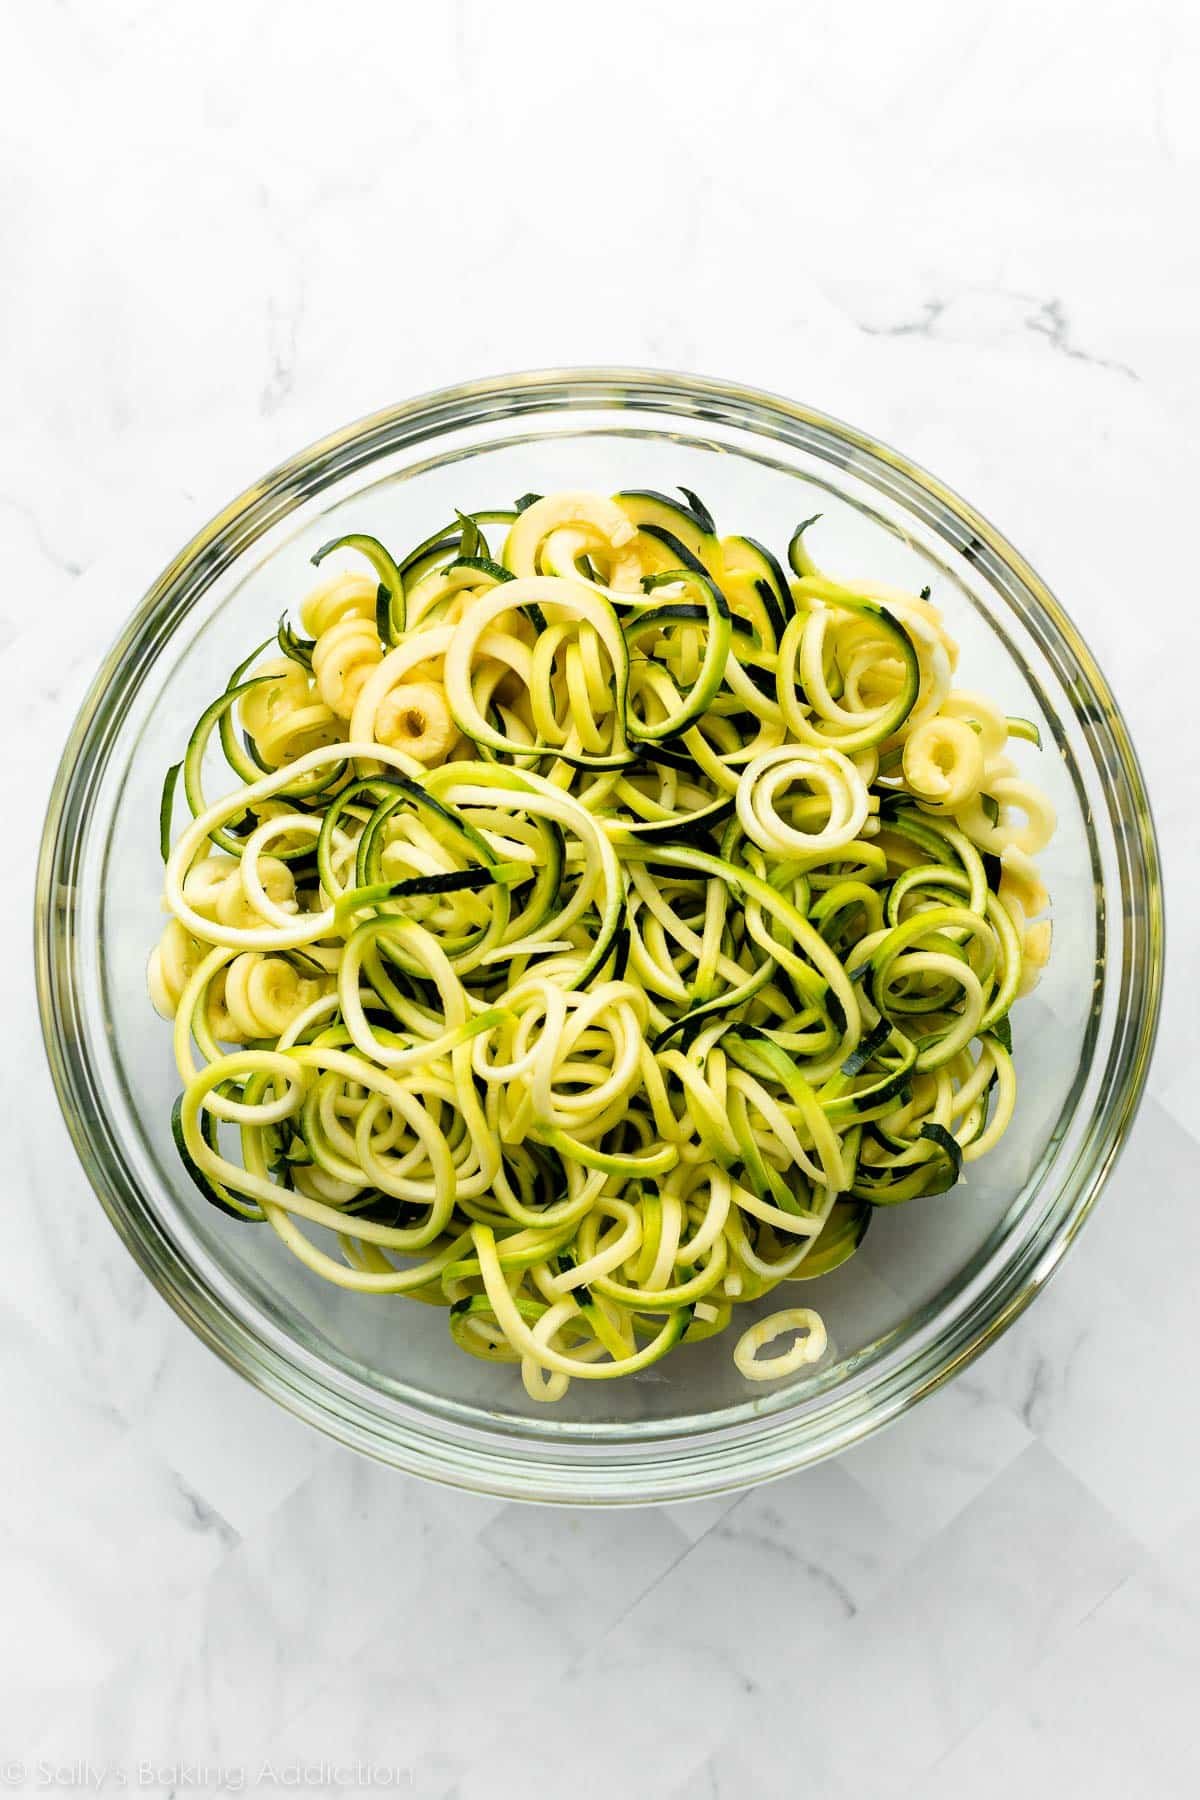 zucchini noodles in glass bowl.